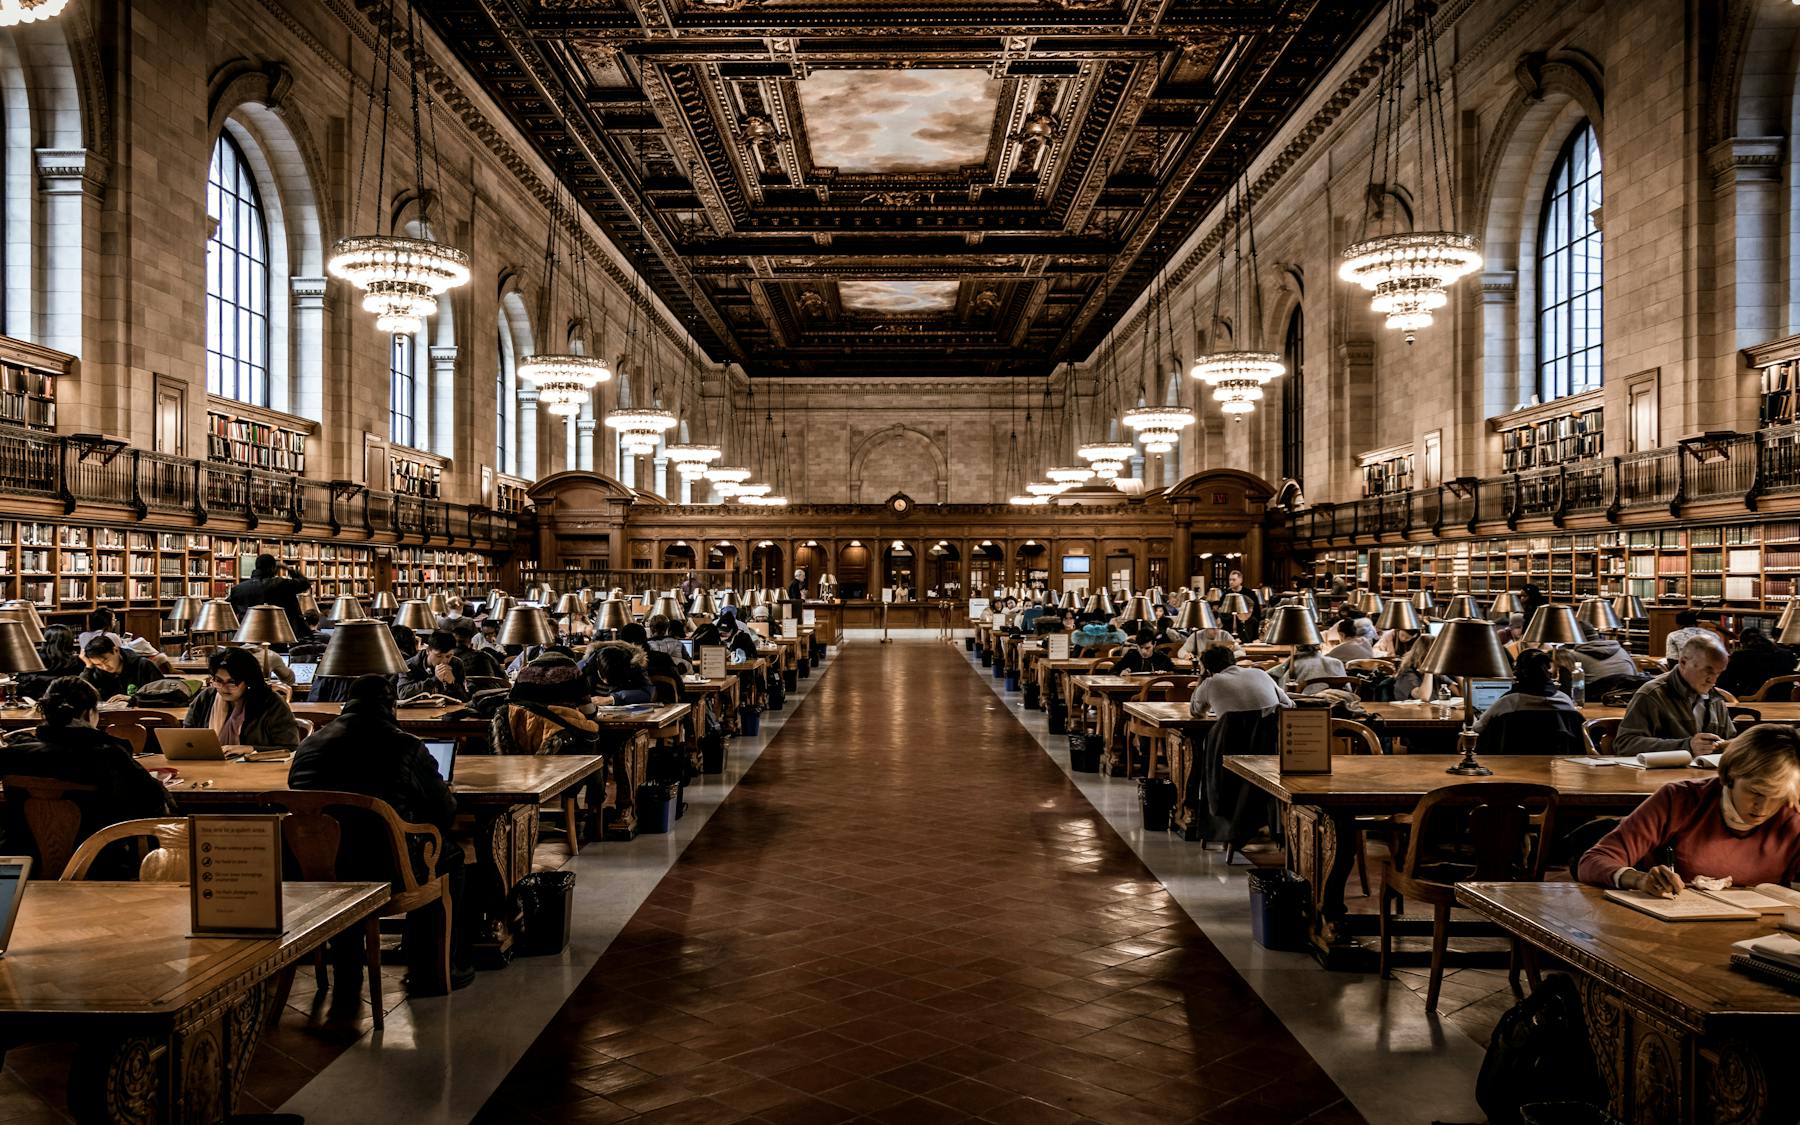 The Rose Main Reading Room at the Stephen A. Schwarzman Building (also known as New York Public Library Main Branch)